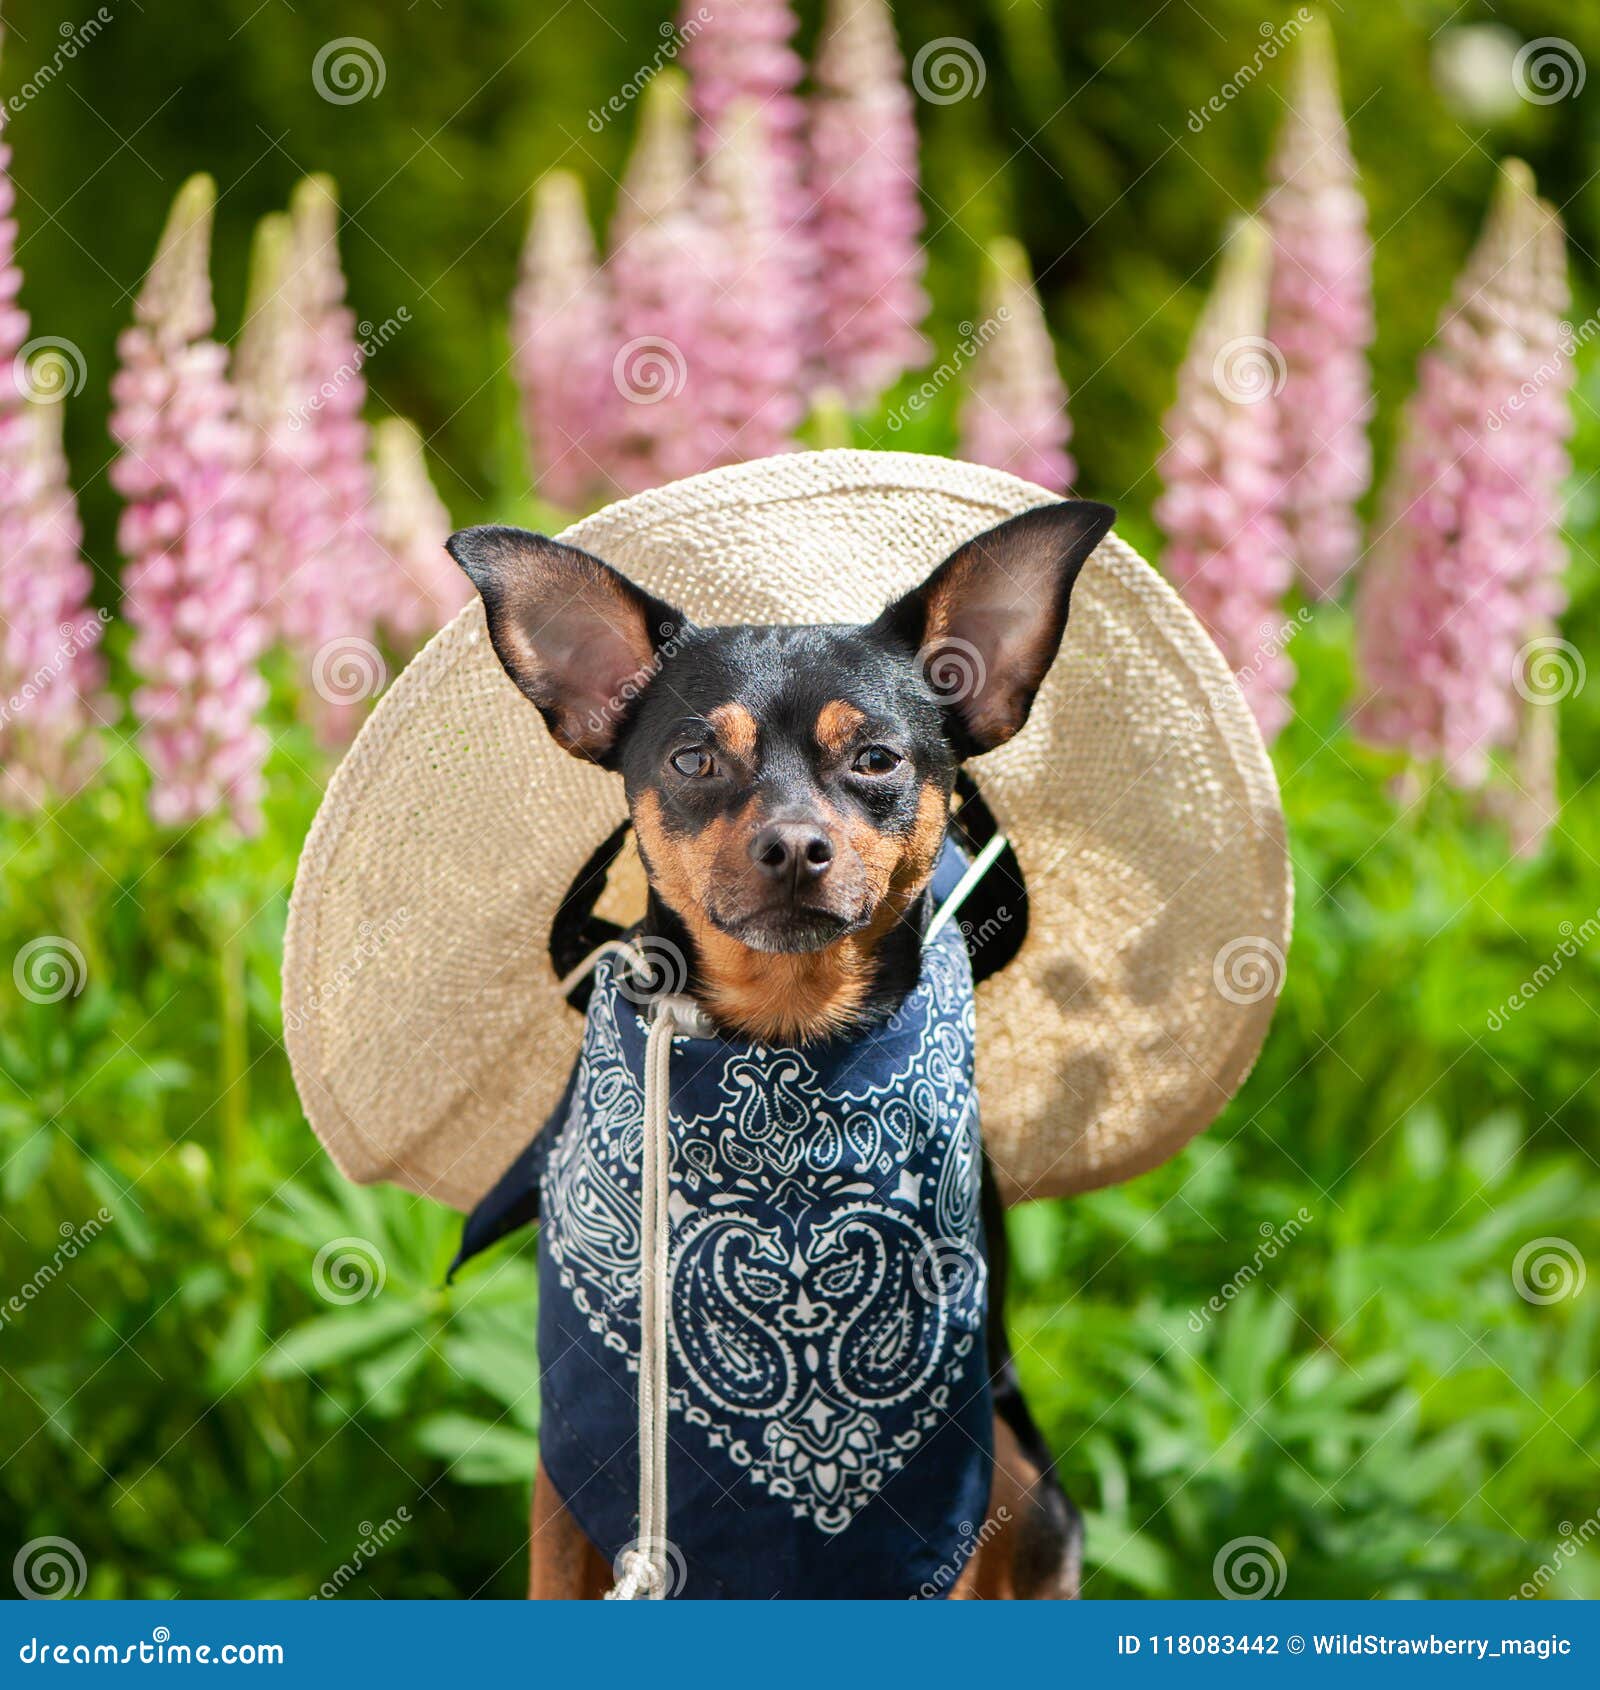 Dog In The Image Of A Farmer A Horticulturist A Flower Grower